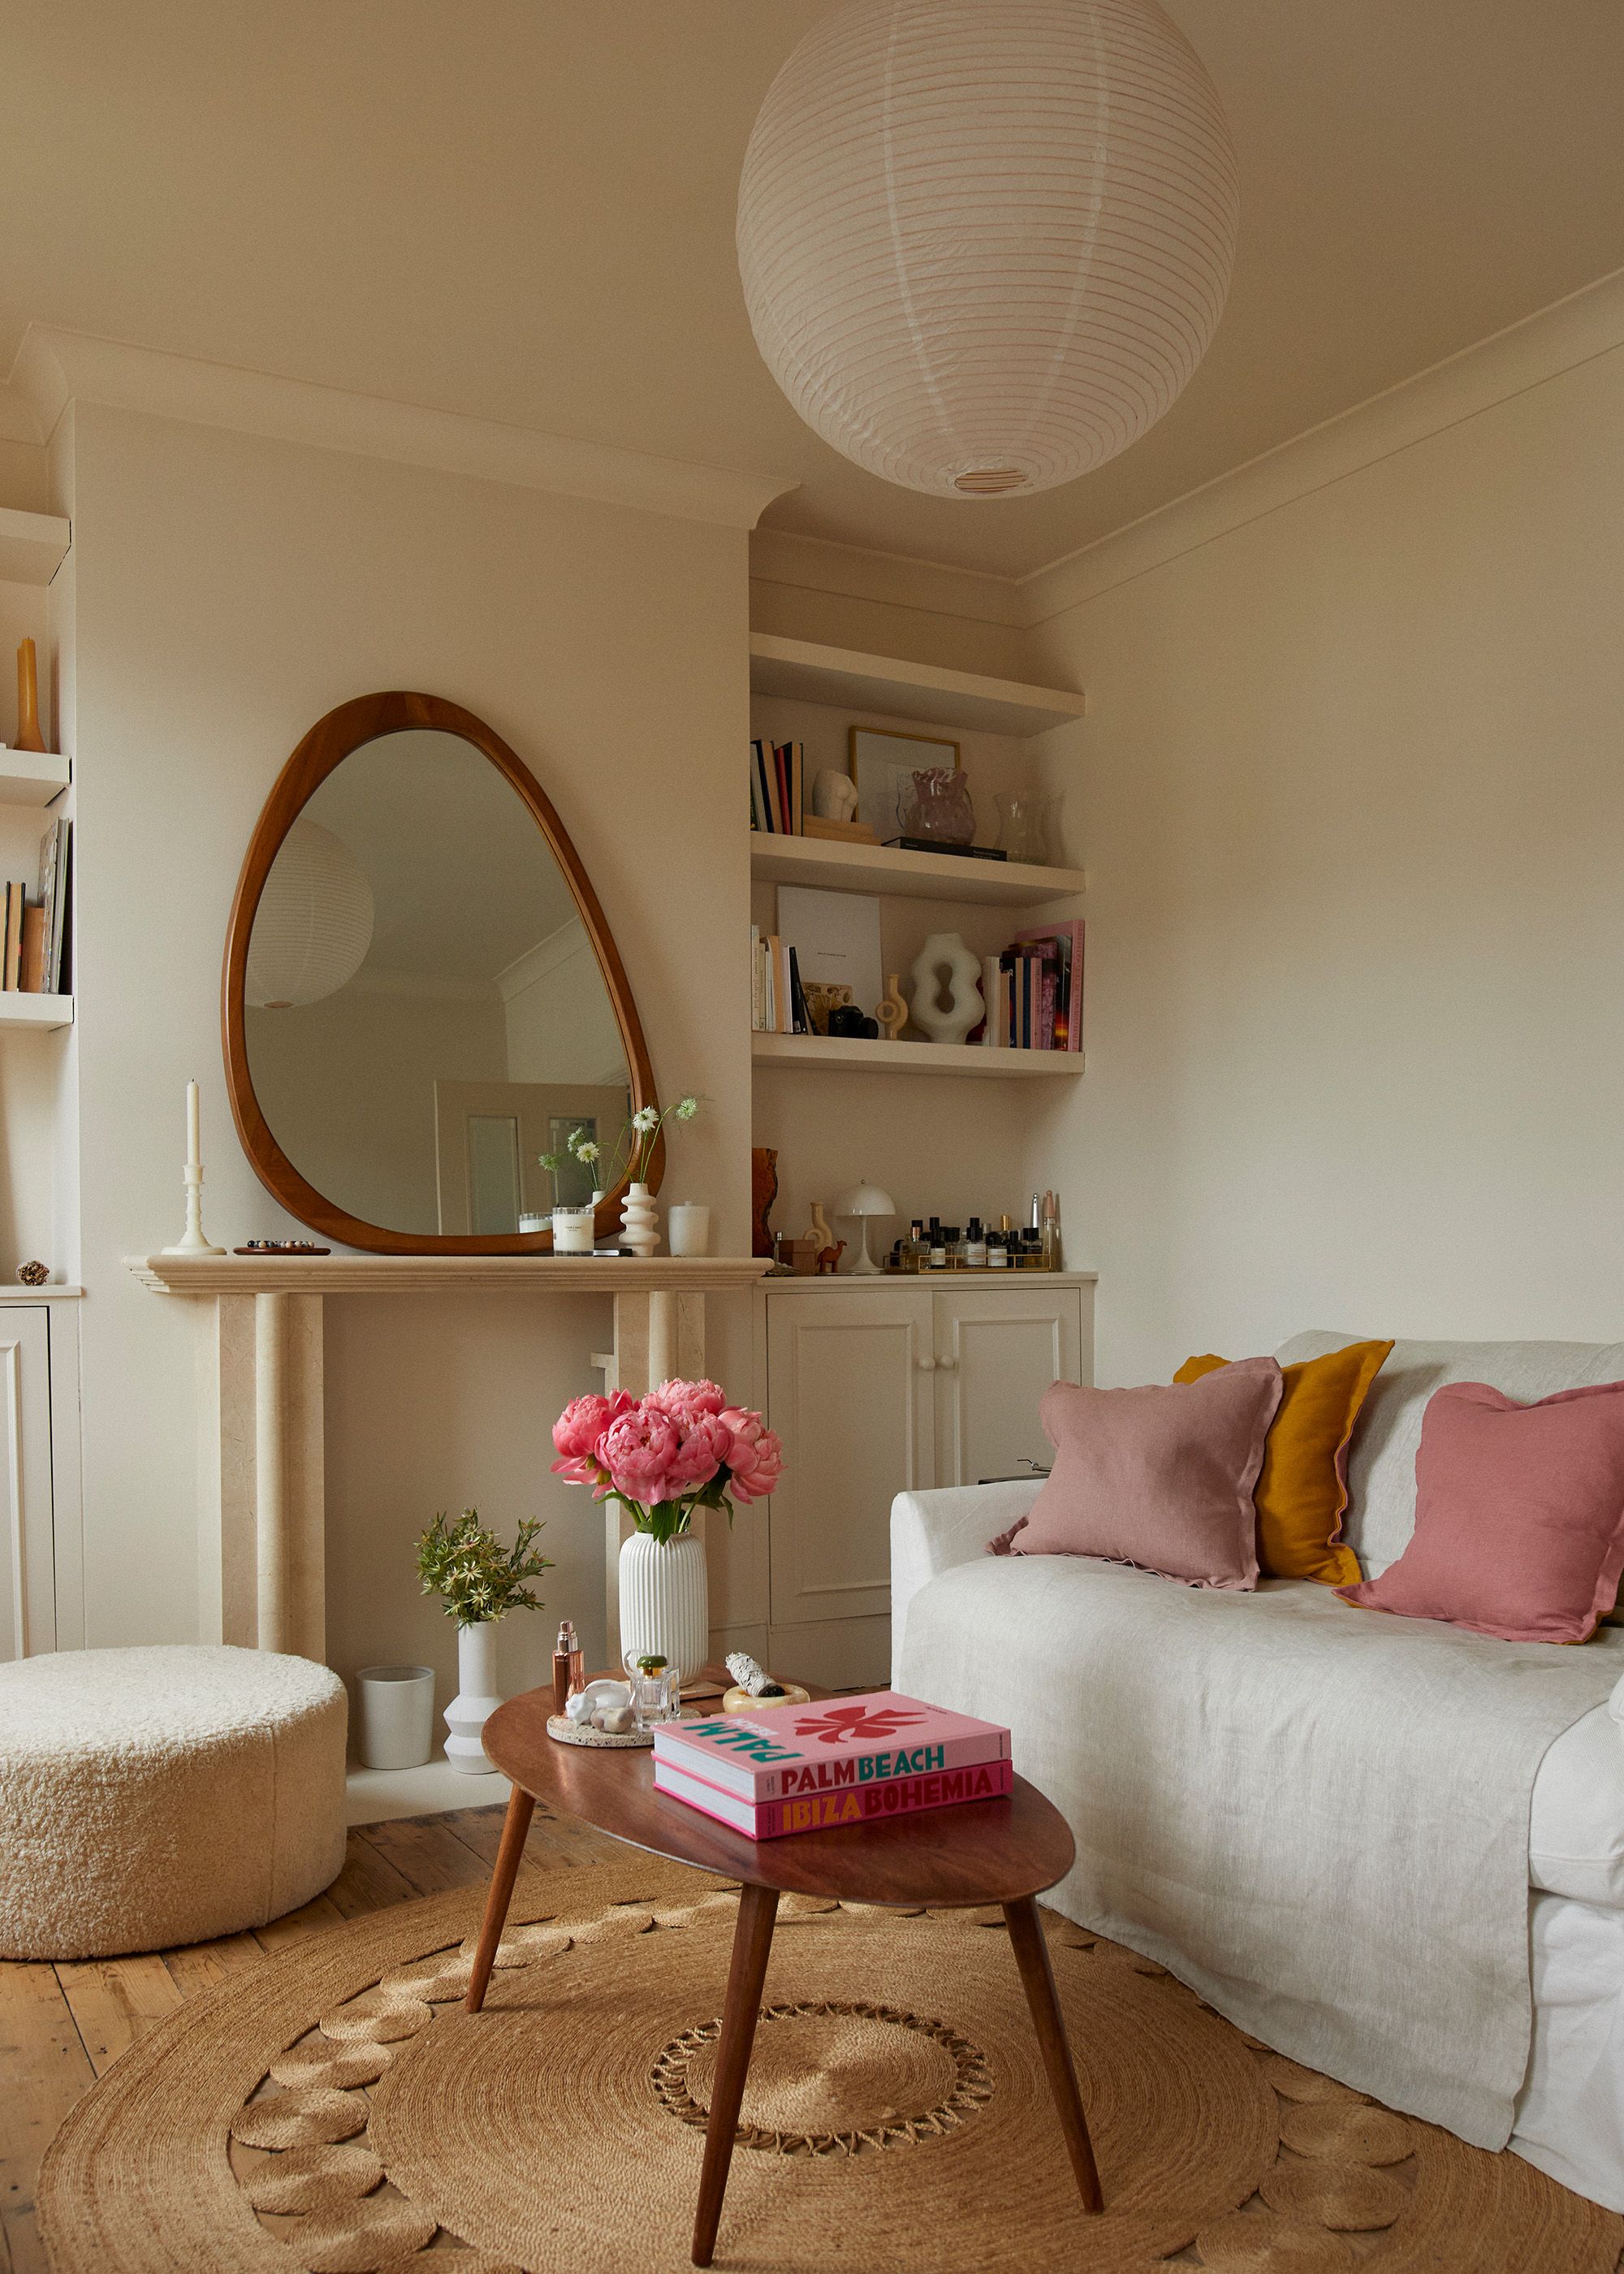 8 simple ways to give your living room a makeover on a budget